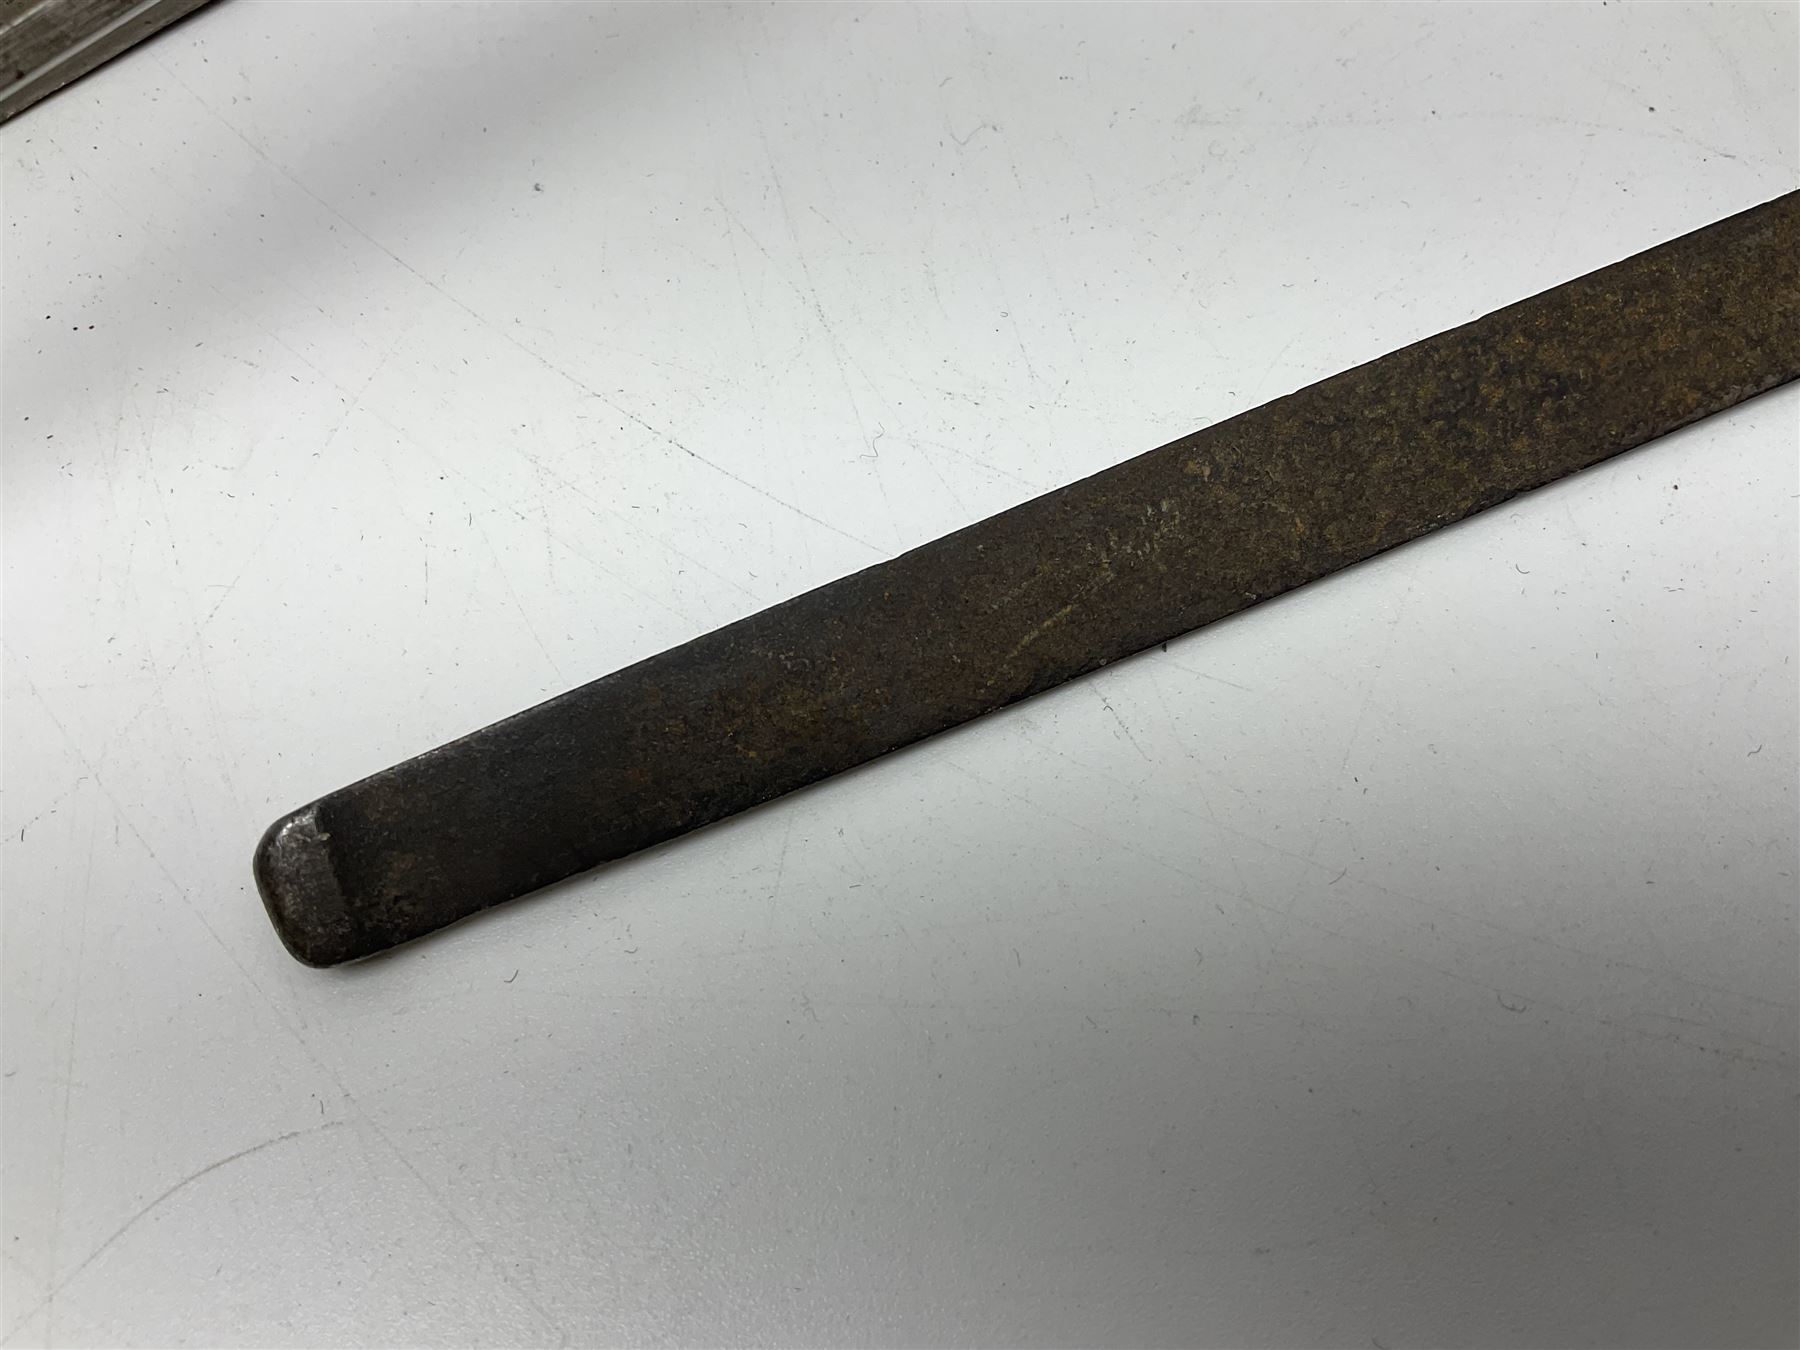 Late Victorian British Military gymnasium practice sword with 85.5cm fullered blunt pointed narrow s - Image 22 of 44